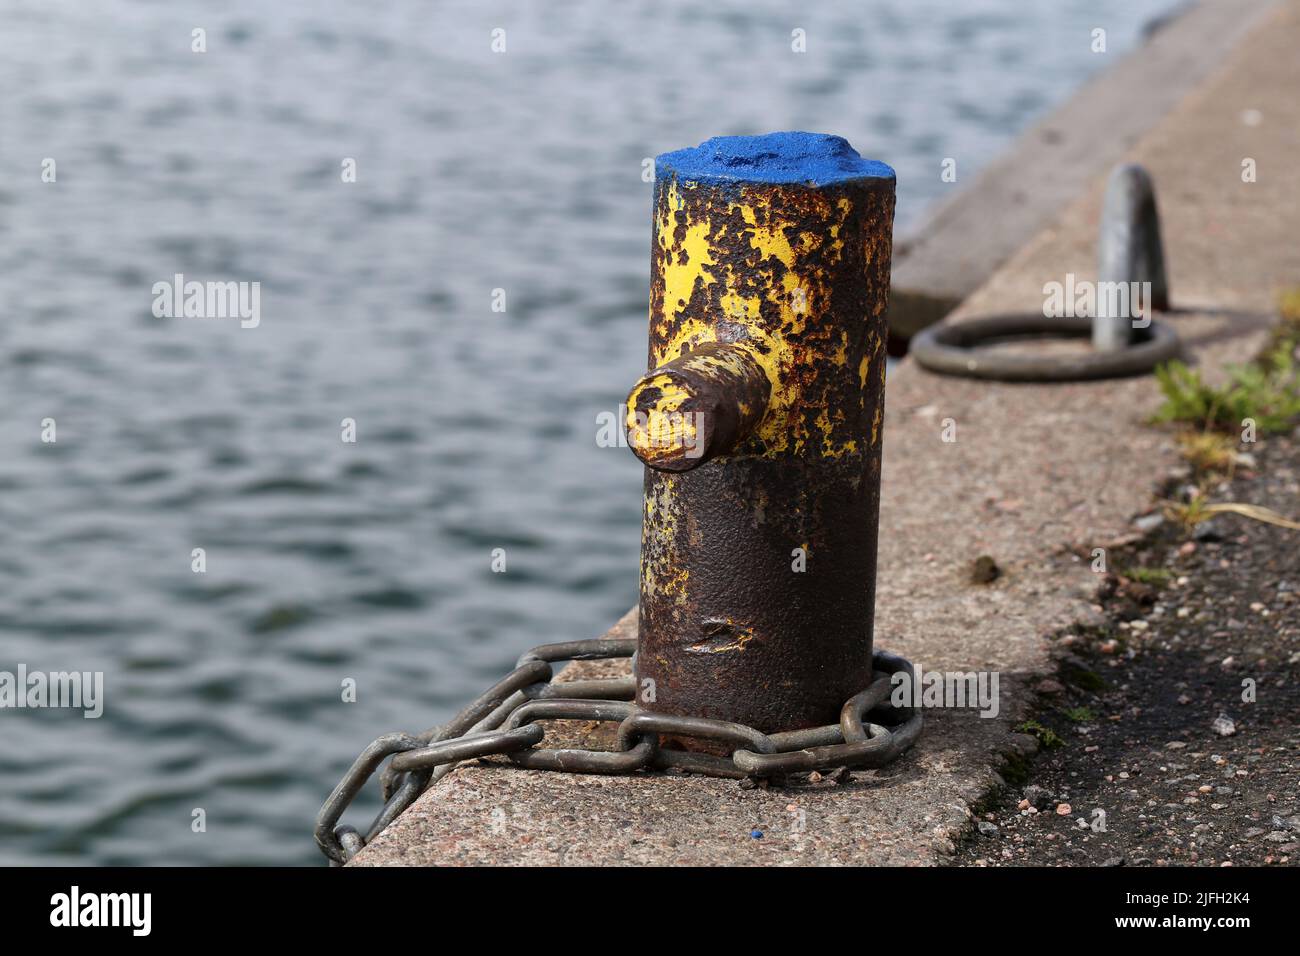 Small harbor architecture details in Helsinki, Finland, June 2019. Old rusty metal pole to which you can chain a boat. Also some concrete floor. Stock Photo